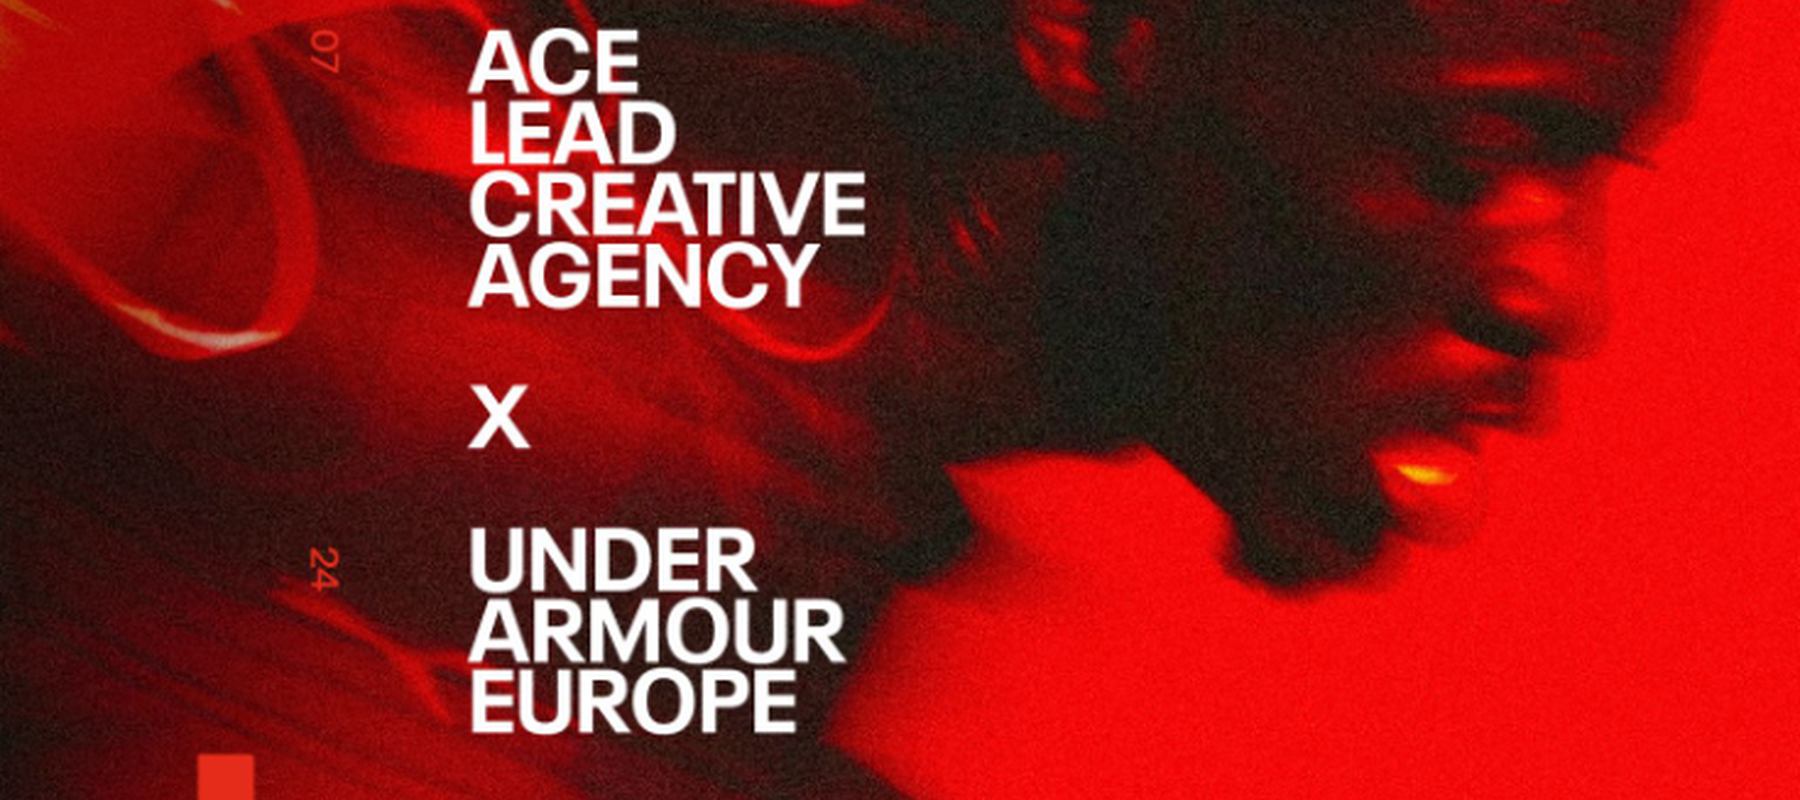 Under Armour Europe picks Ace as its creative agency in Europe